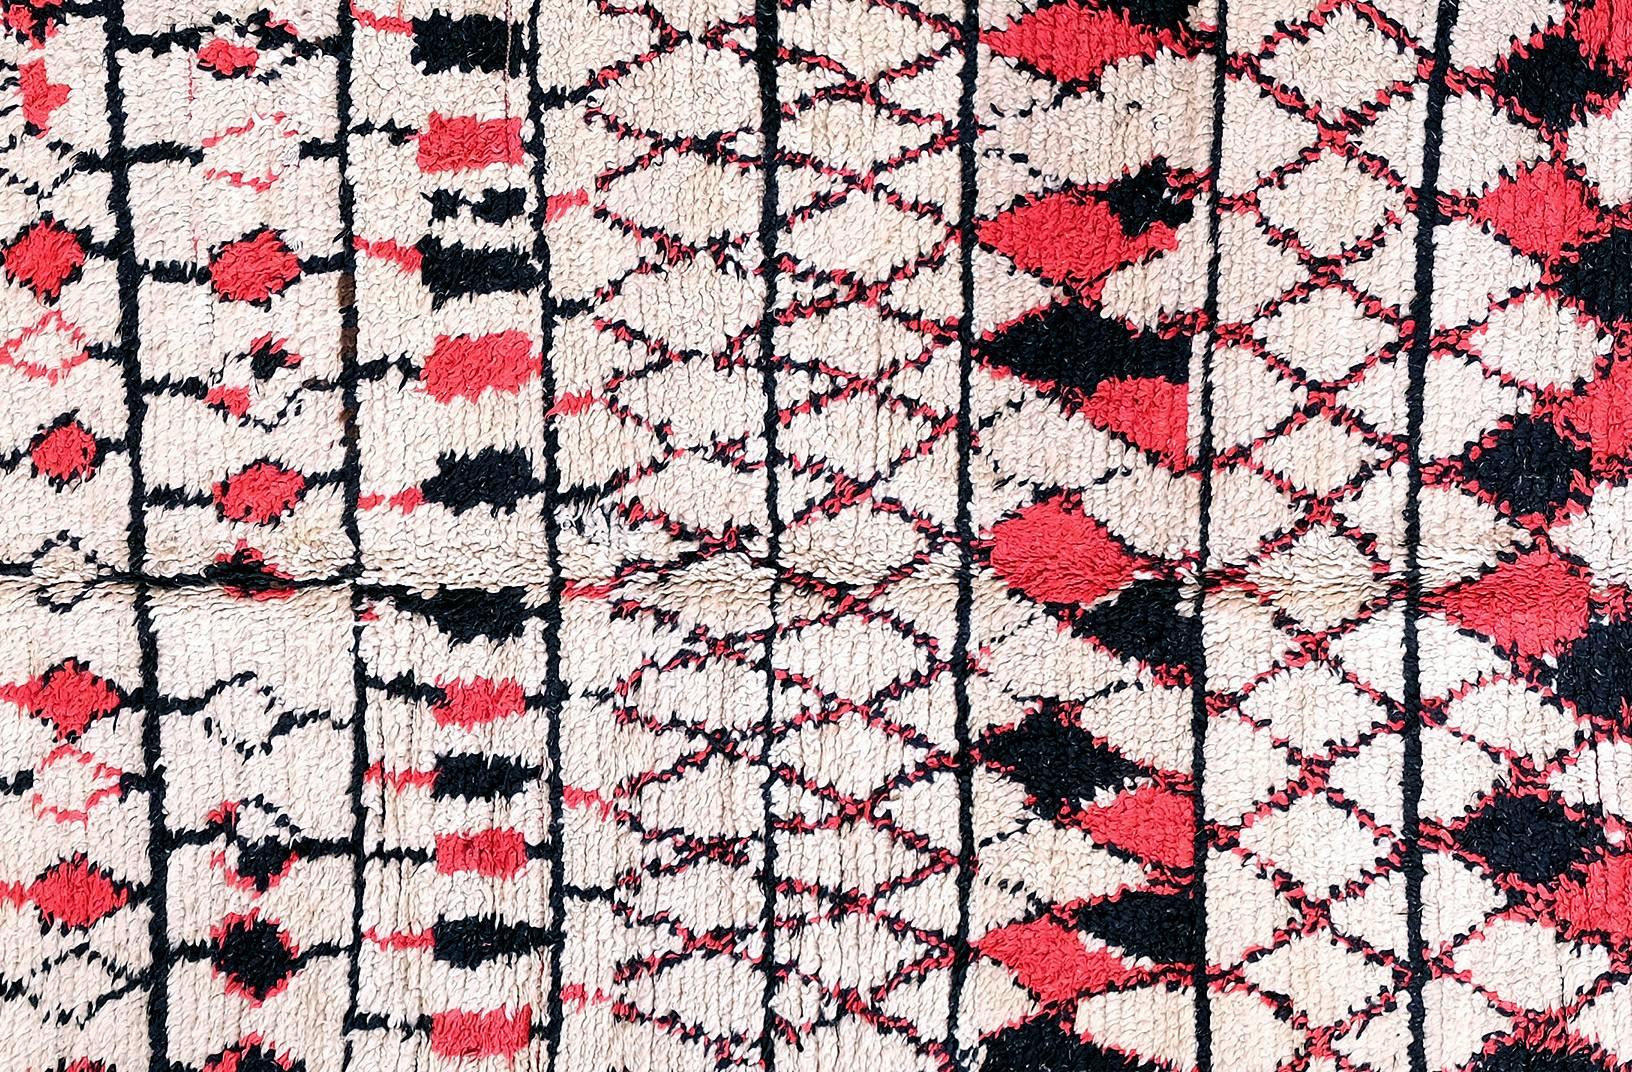 Beautiful Berber carpet from Morocco. This carpet is a real old hand-knotted one from naturally dyed wool. This rug is characterized by an abstract geometric motif, in this case: black and red diamonds and lines. The Berber carpets are very warm,